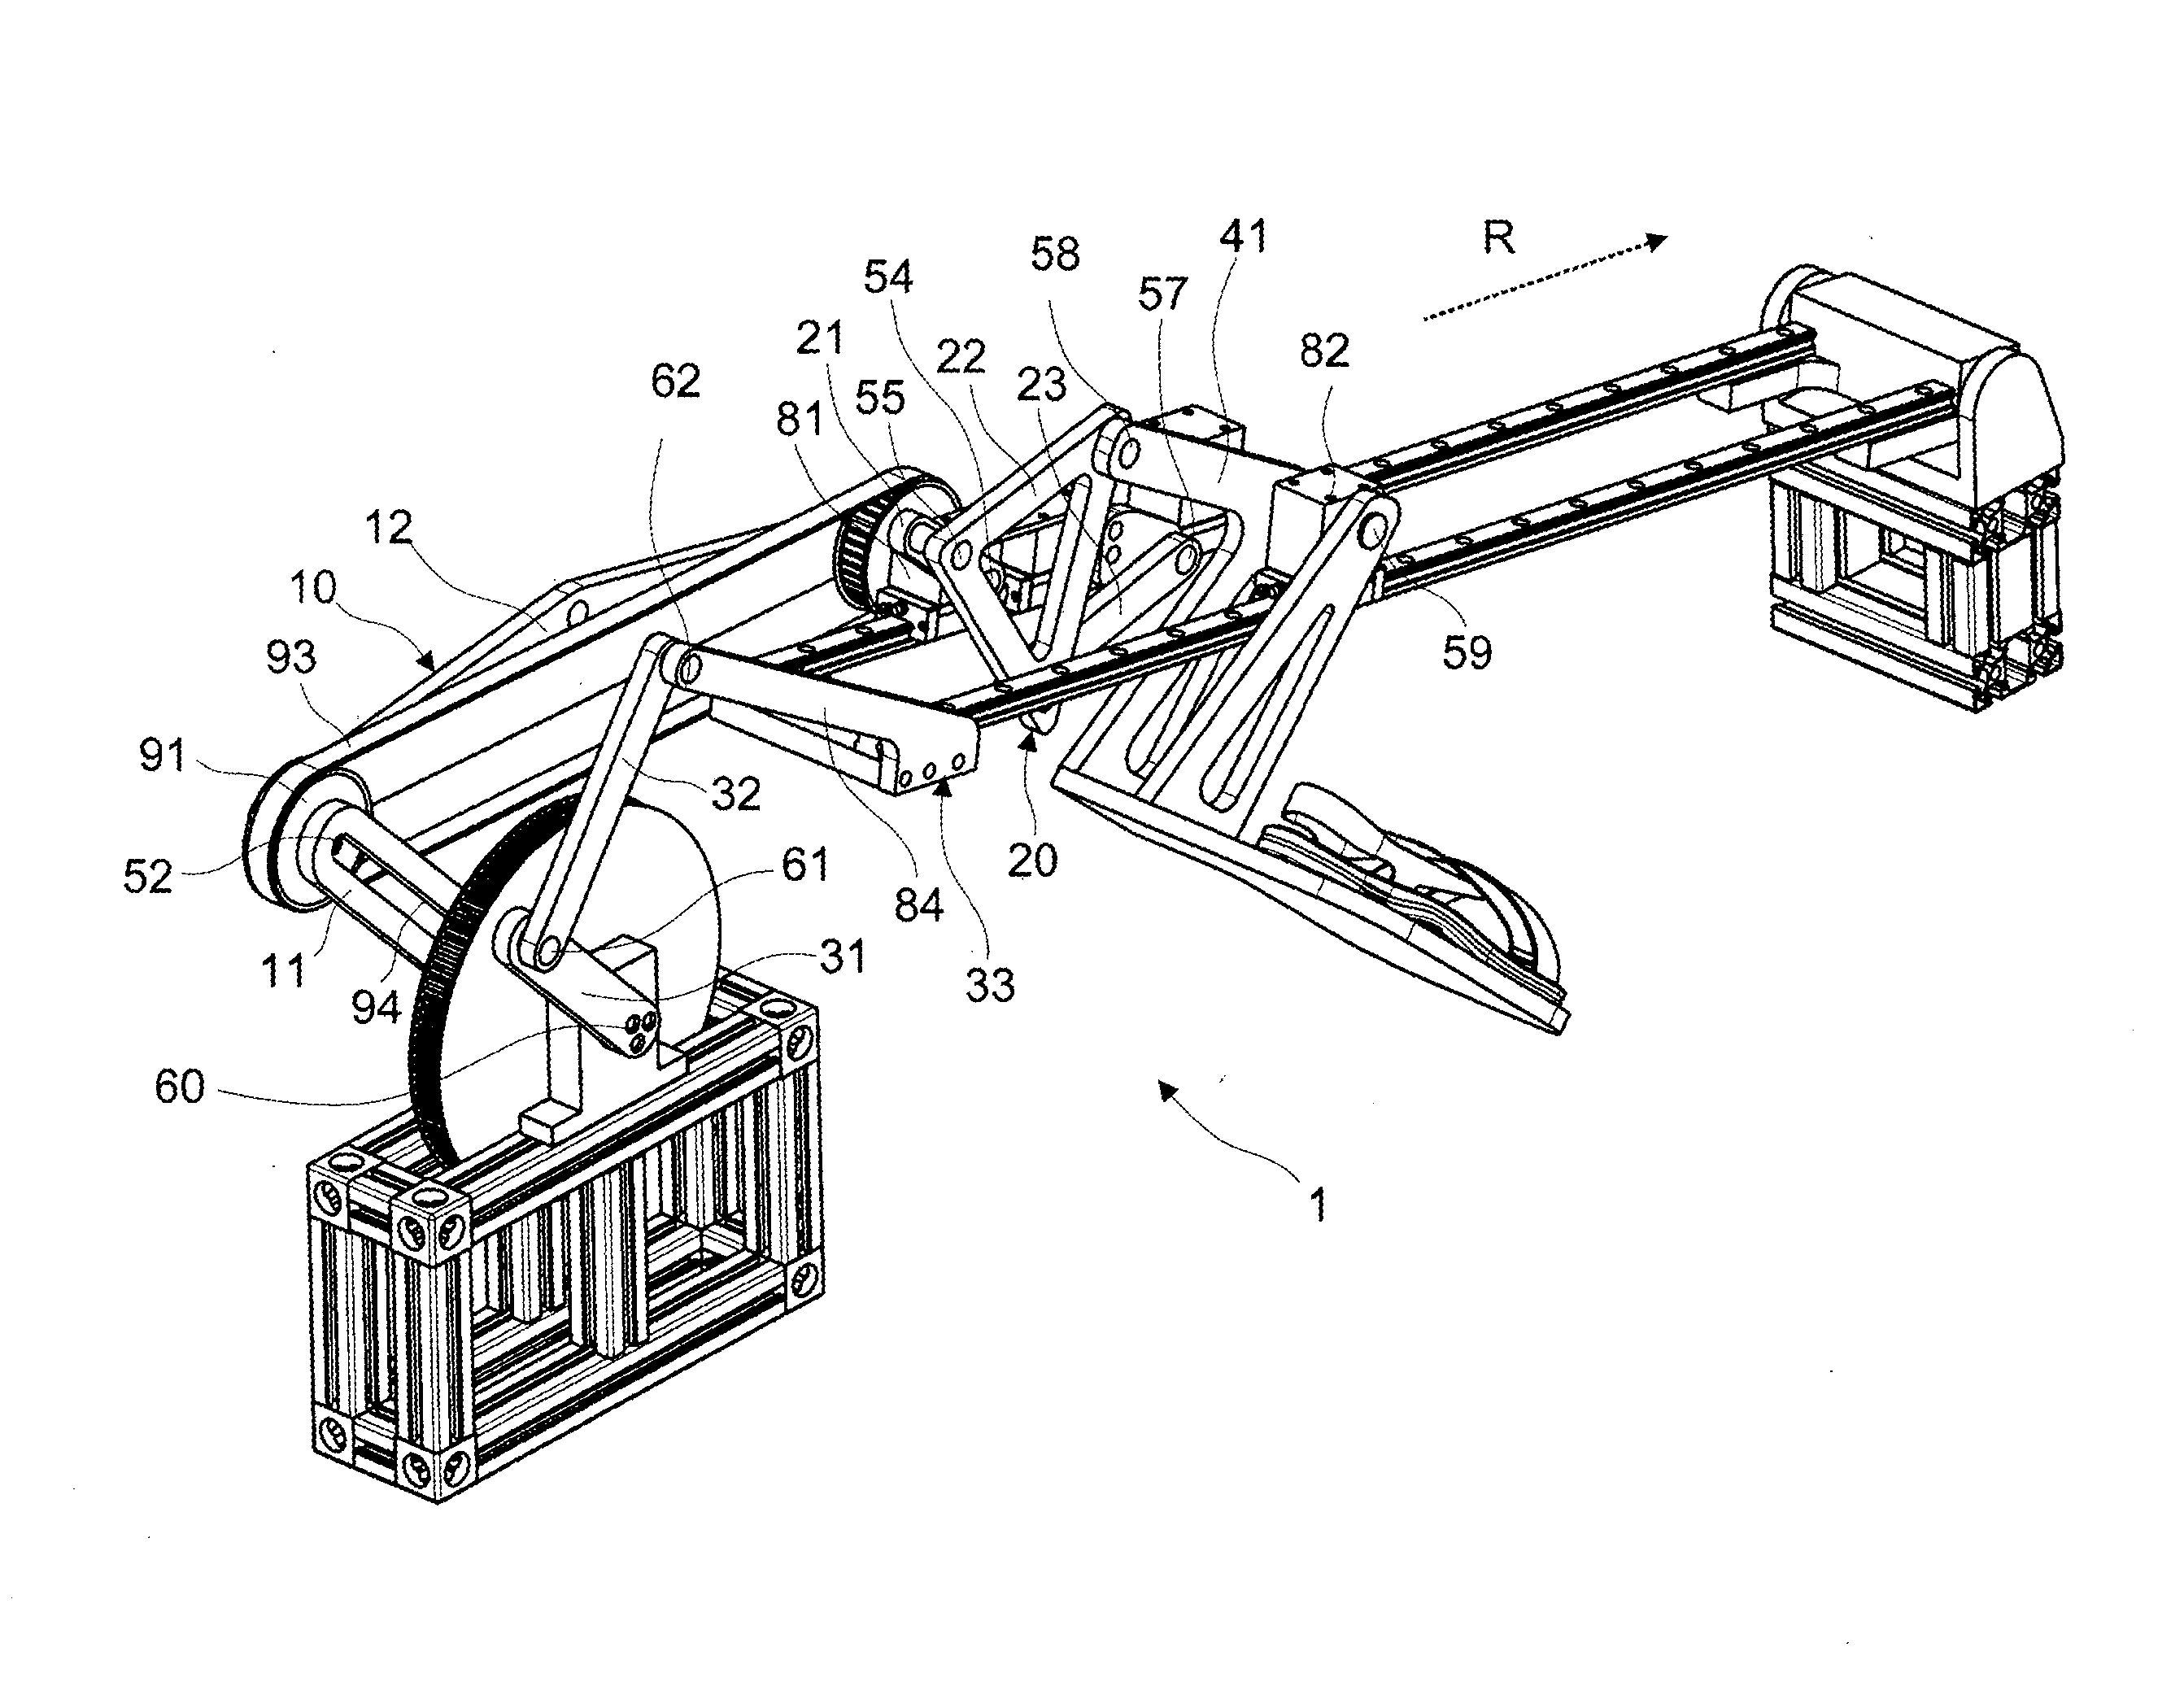 Gait training apparatus for generating a natural gait pattern